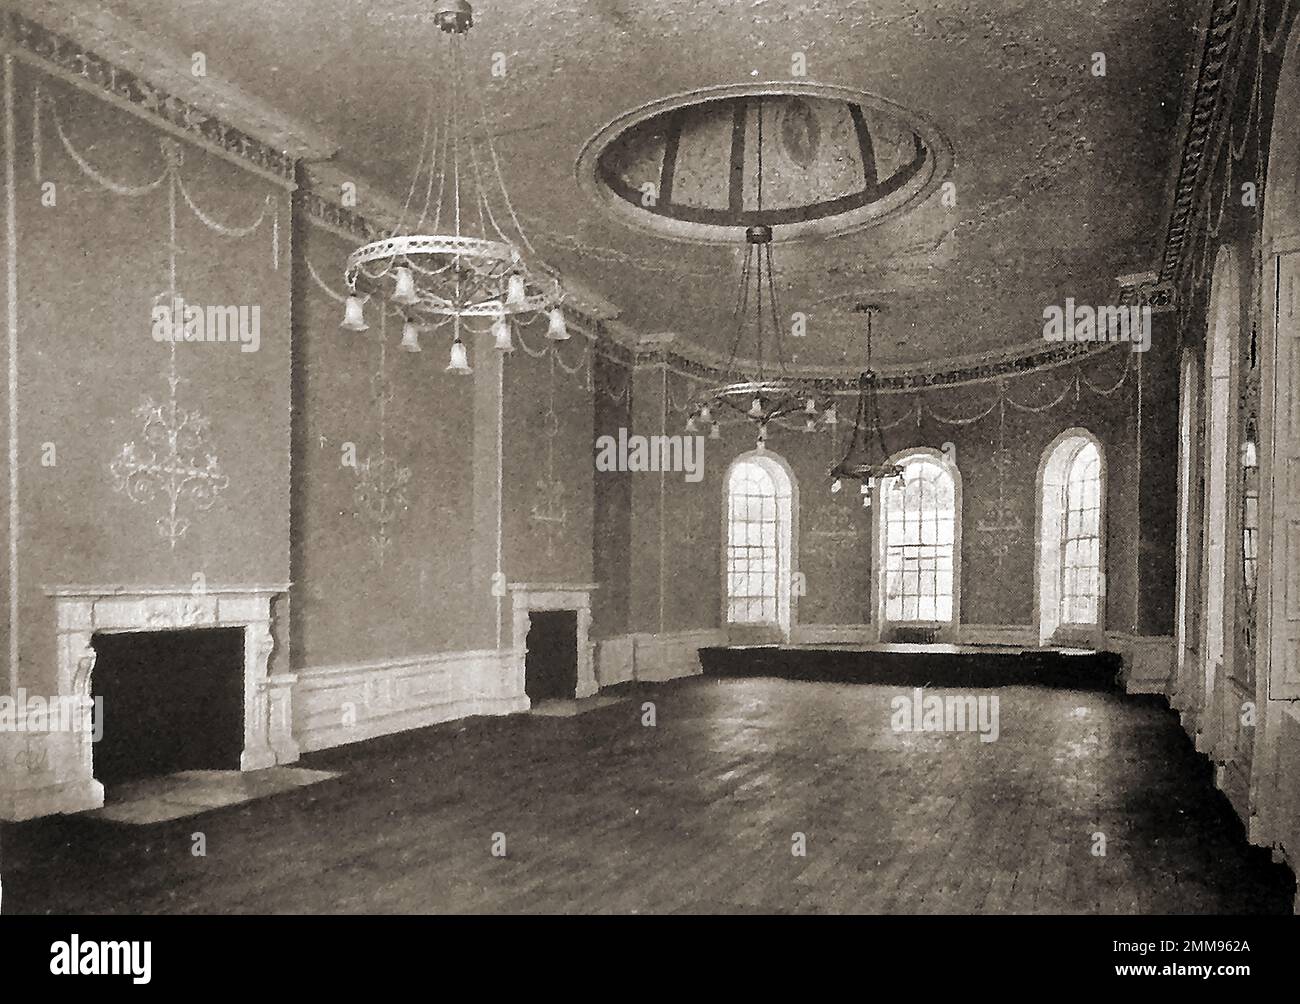 British pubs inns & taverns - A circa 1940 old photograph of  the Adam Ballroom at the Lion in Shrewsbury. King William IV, Charles Dickens, The Beatles and Charles Darling are said to have stayed here., Stock Photo